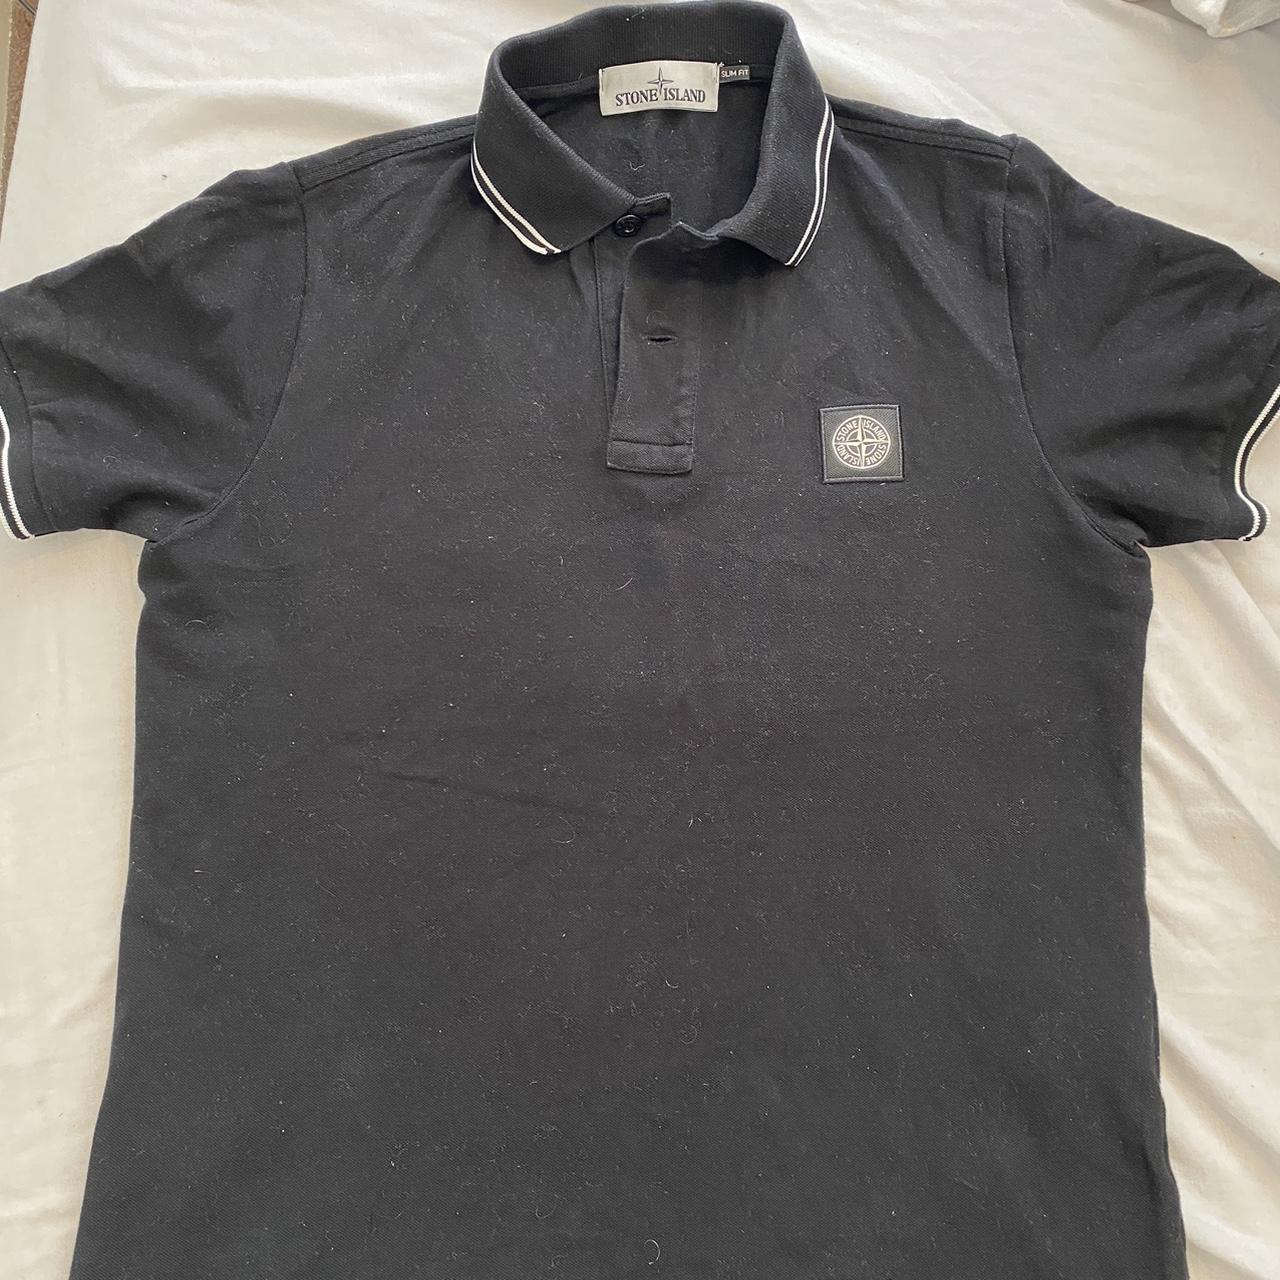 stone island polo too small for me now:( - Depop